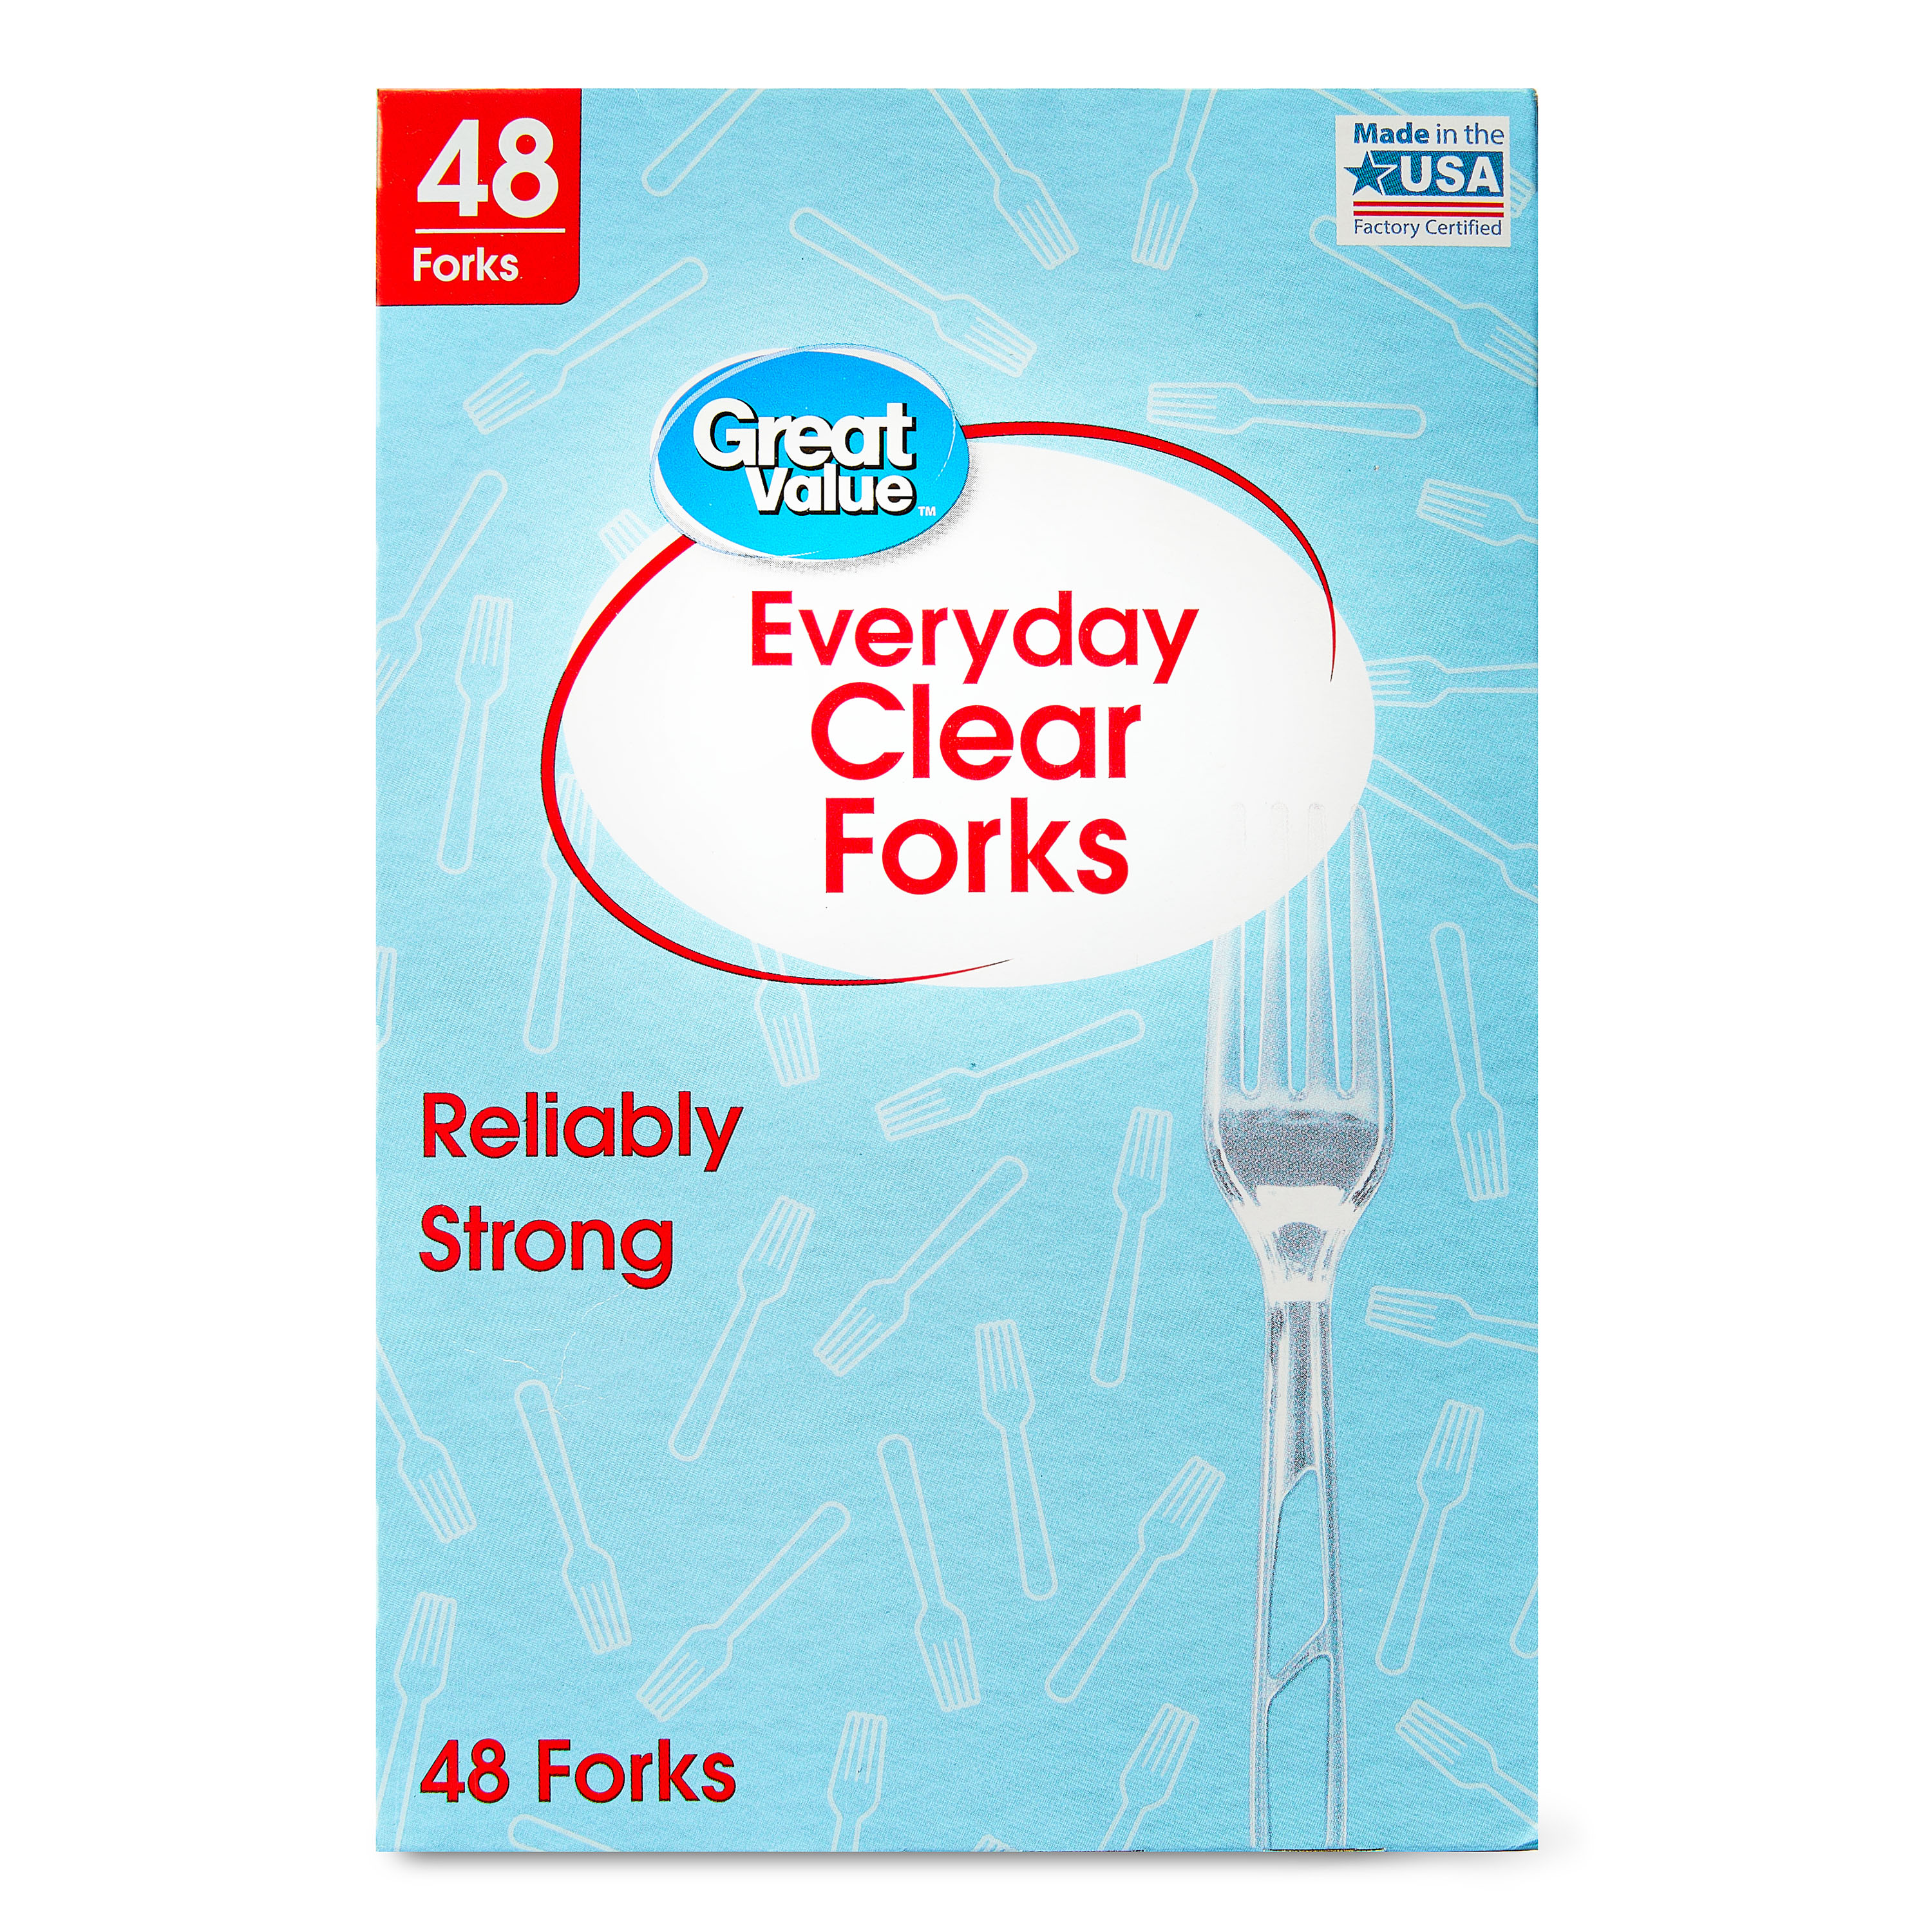 Great Value Premium Clear Disposable Plastic Forks, Clear, 48 Count - image 2 of 7